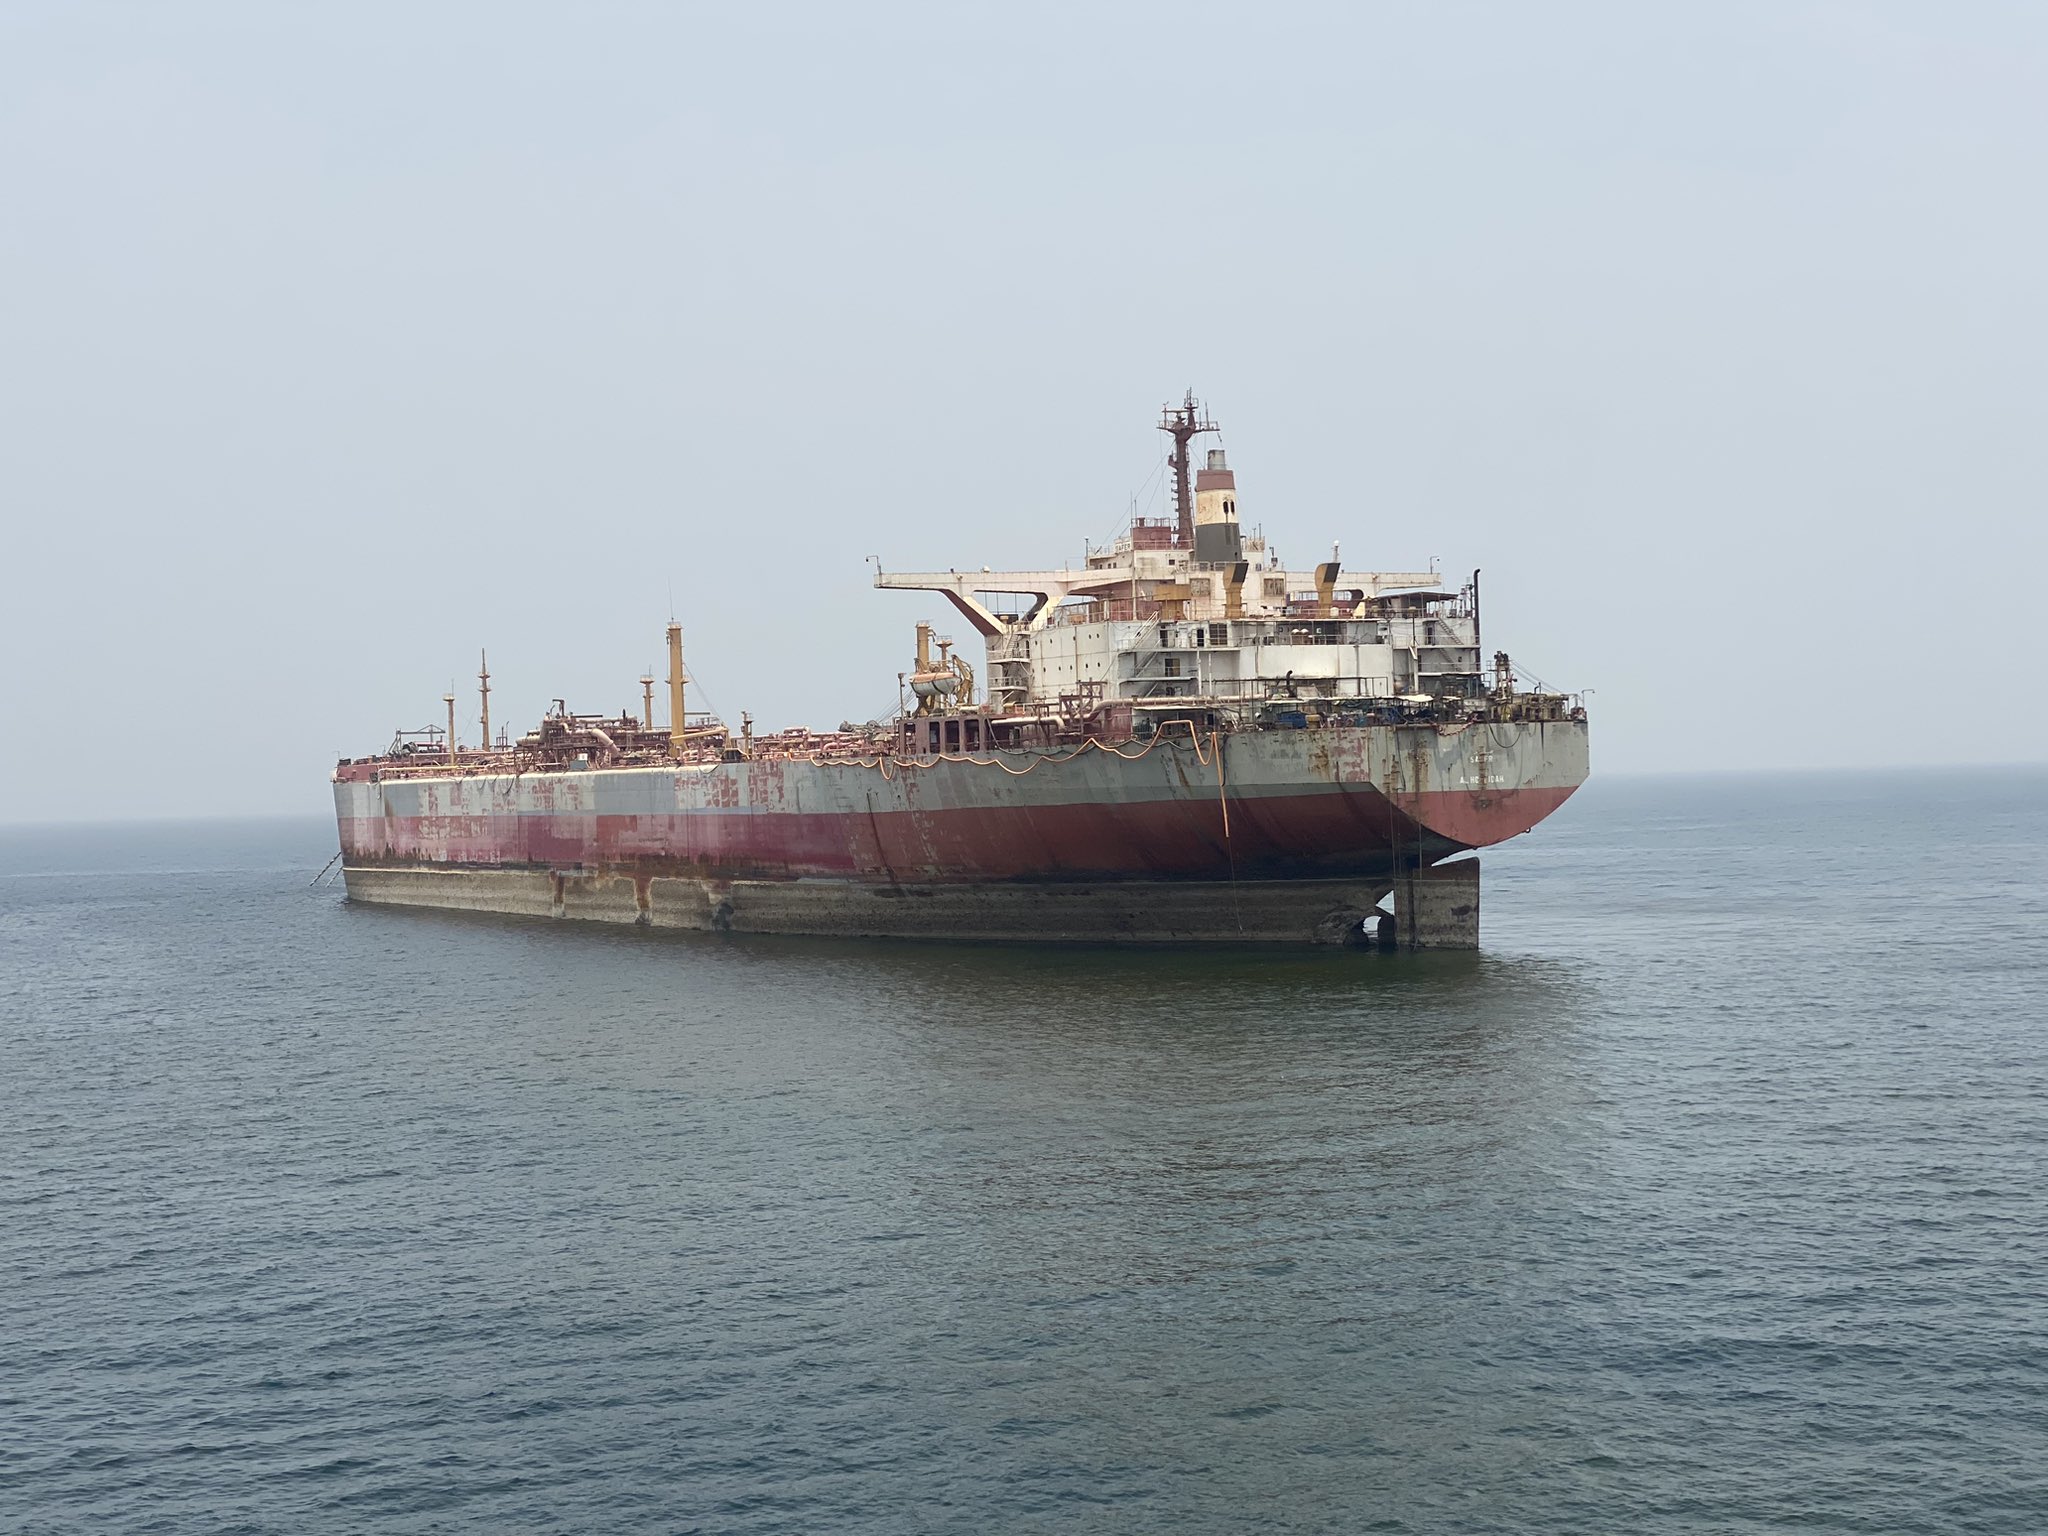 The FSO Safer pictured off the coast of Yemen. Photo courtesy David Gressly